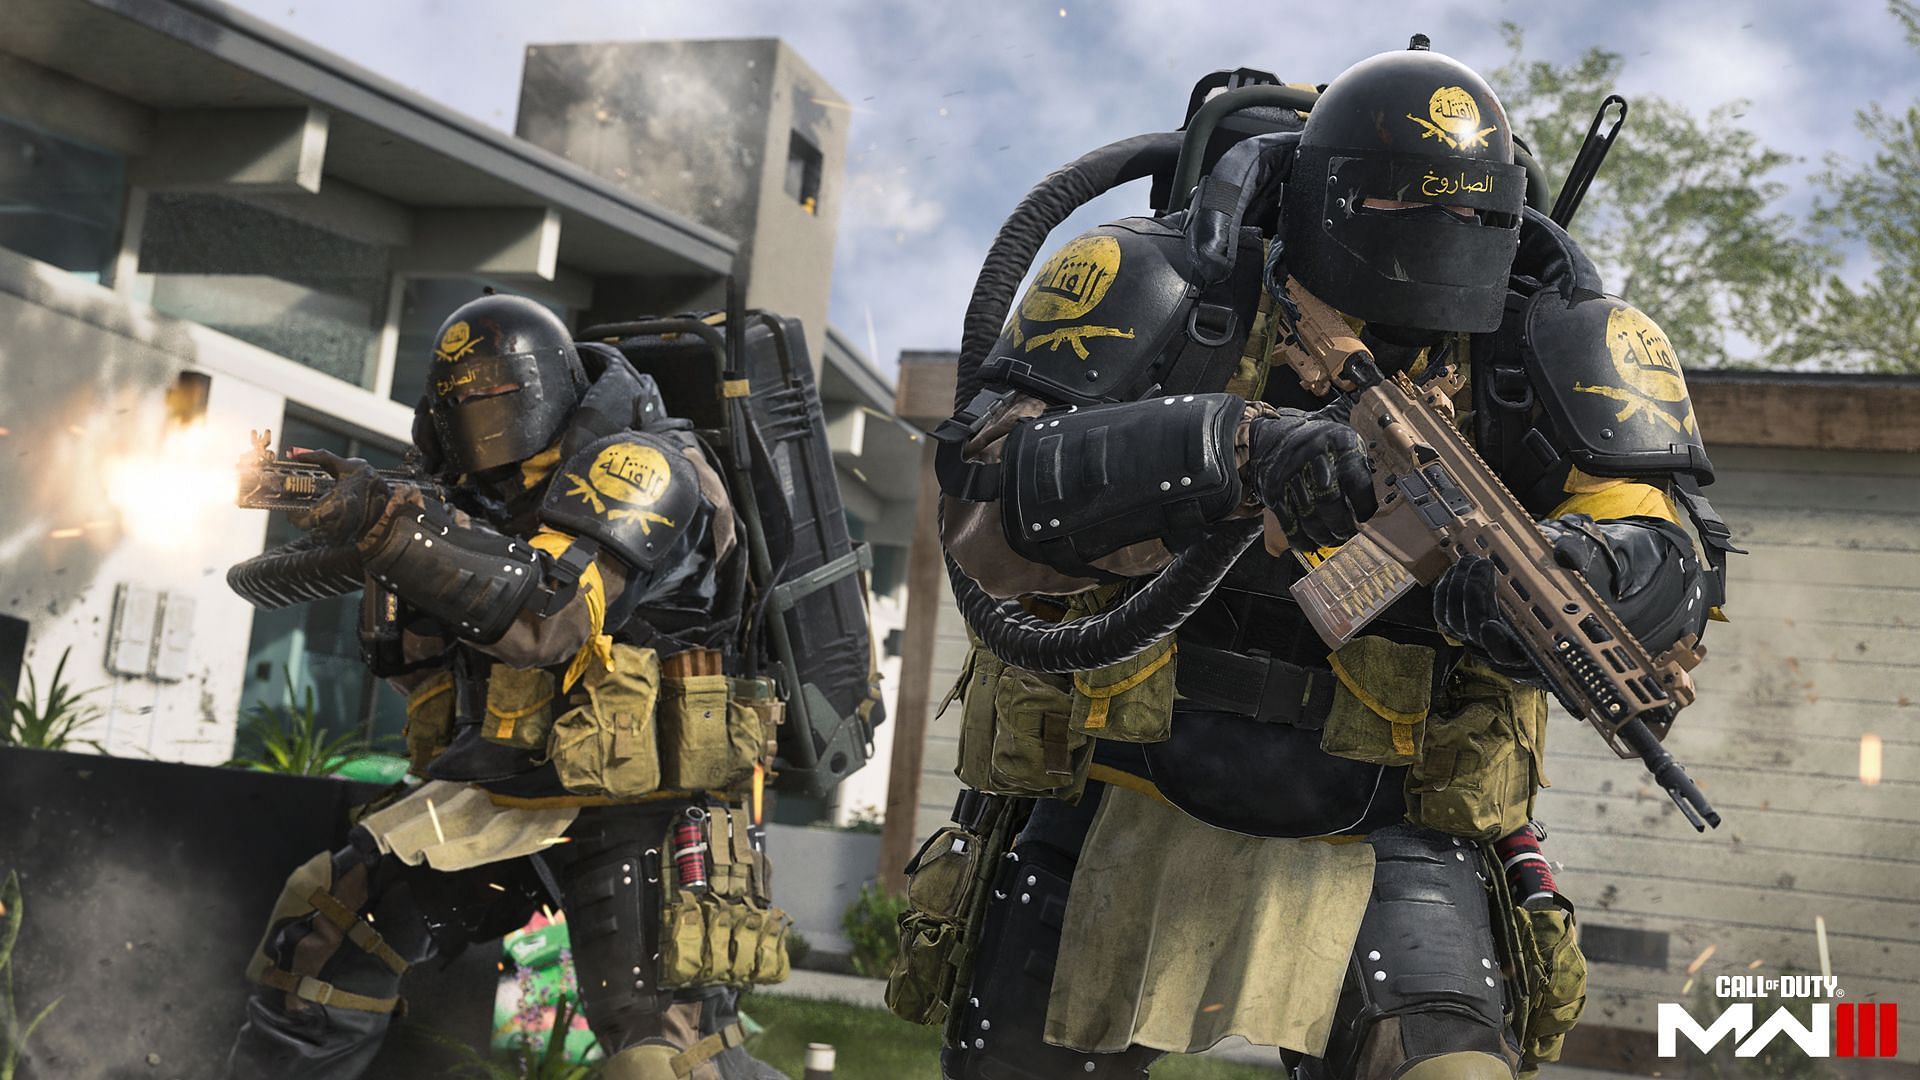 Juggermosh is one of the game modes in Modern Warfare 3 Multiplayer Season 2 (Image via Activision)